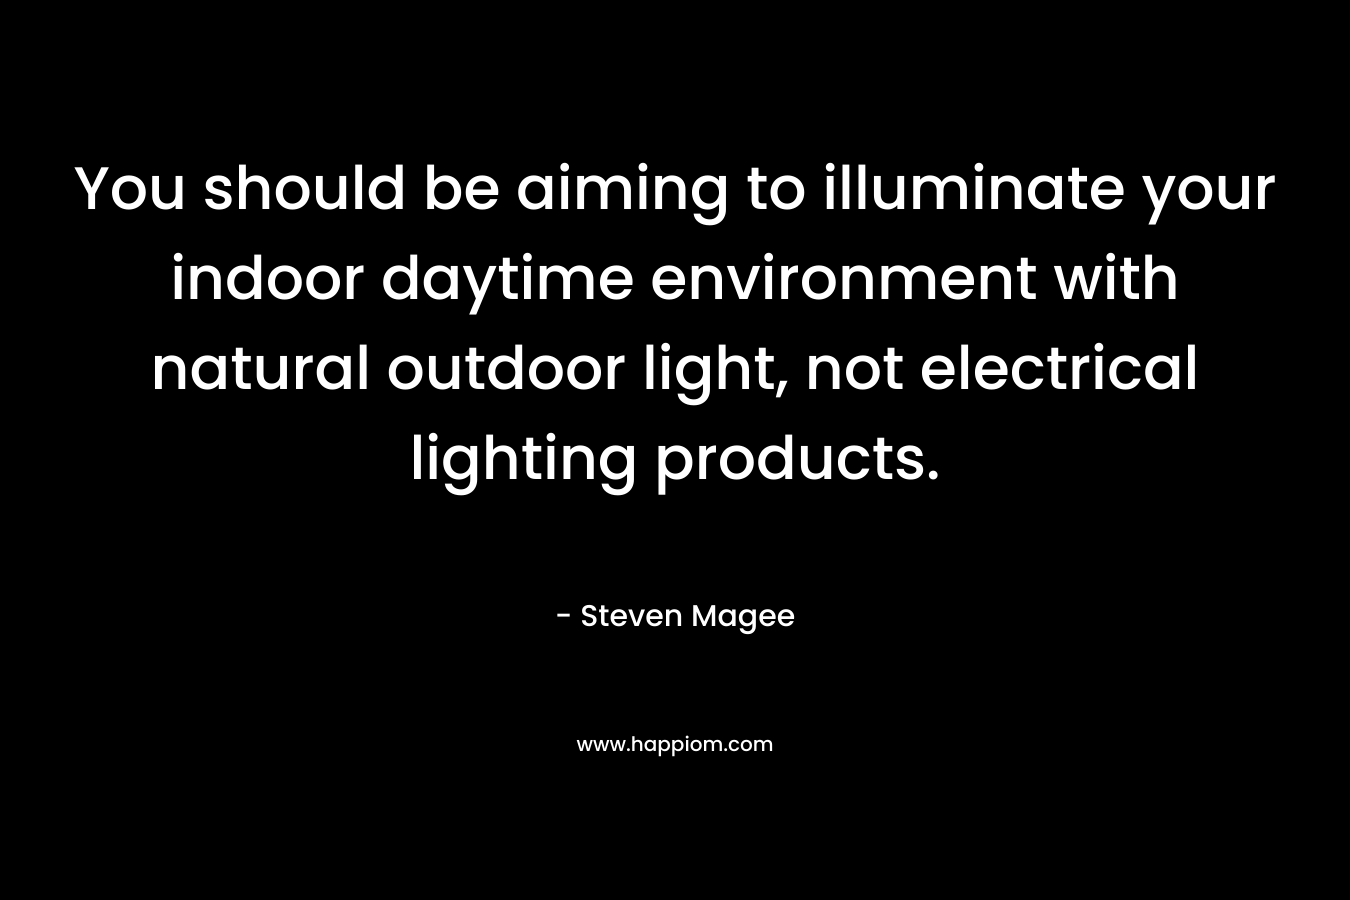 You should be aiming to illuminate your indoor daytime environment with natural outdoor light, not electrical lighting products. – Steven Magee